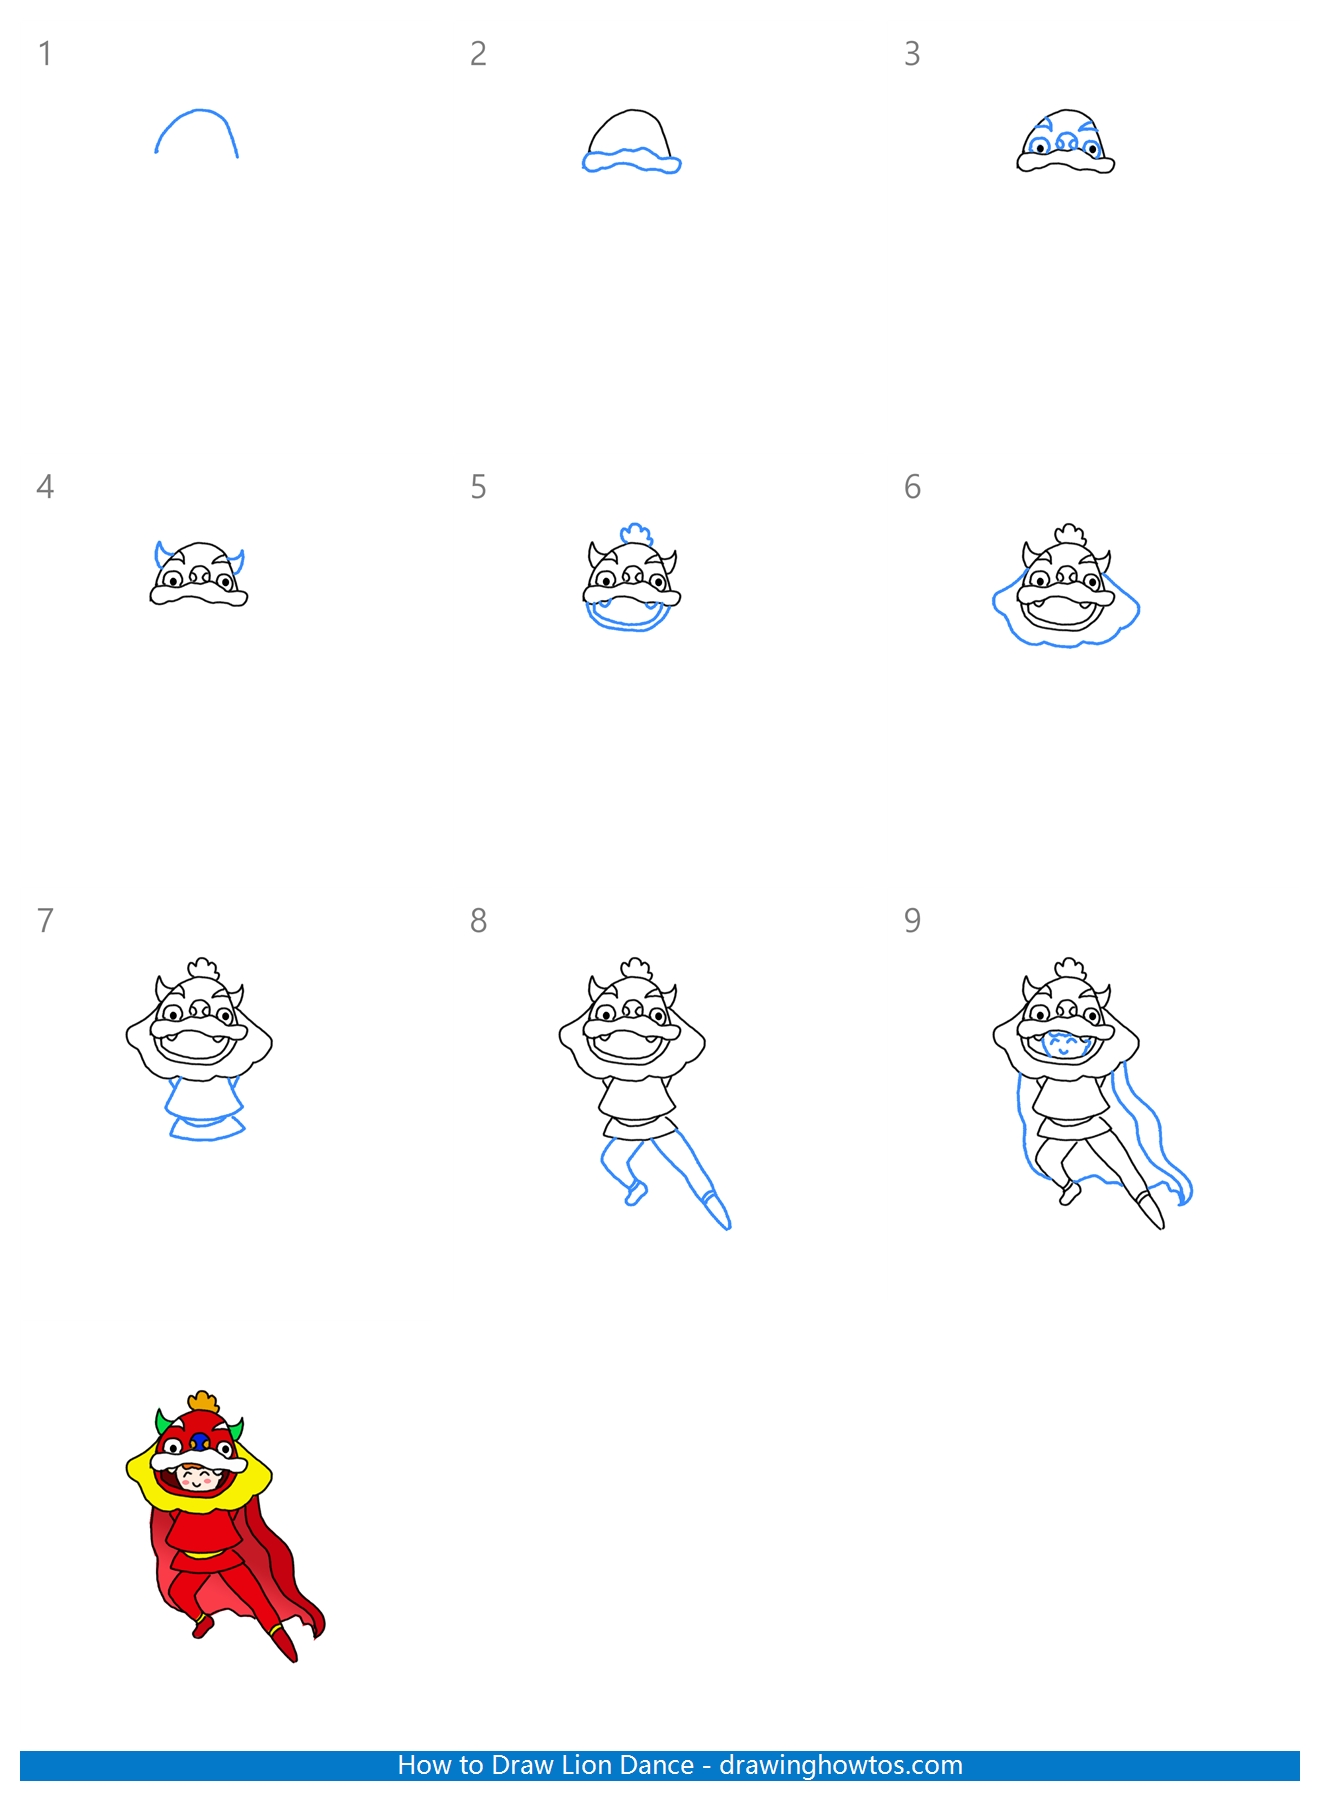 How to Draw Lion Dance Step by Step